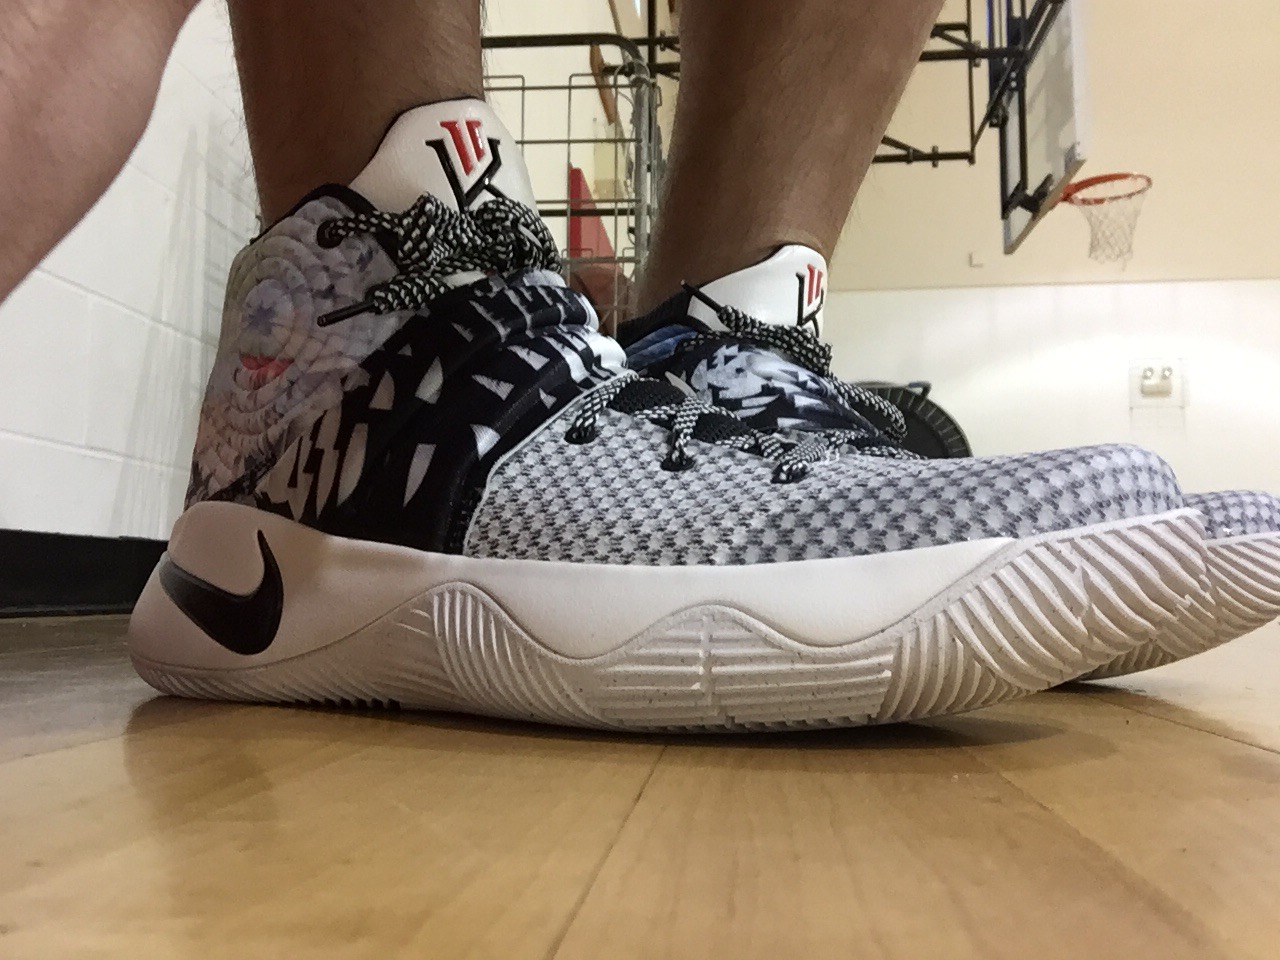 kyrie 2 12 soles